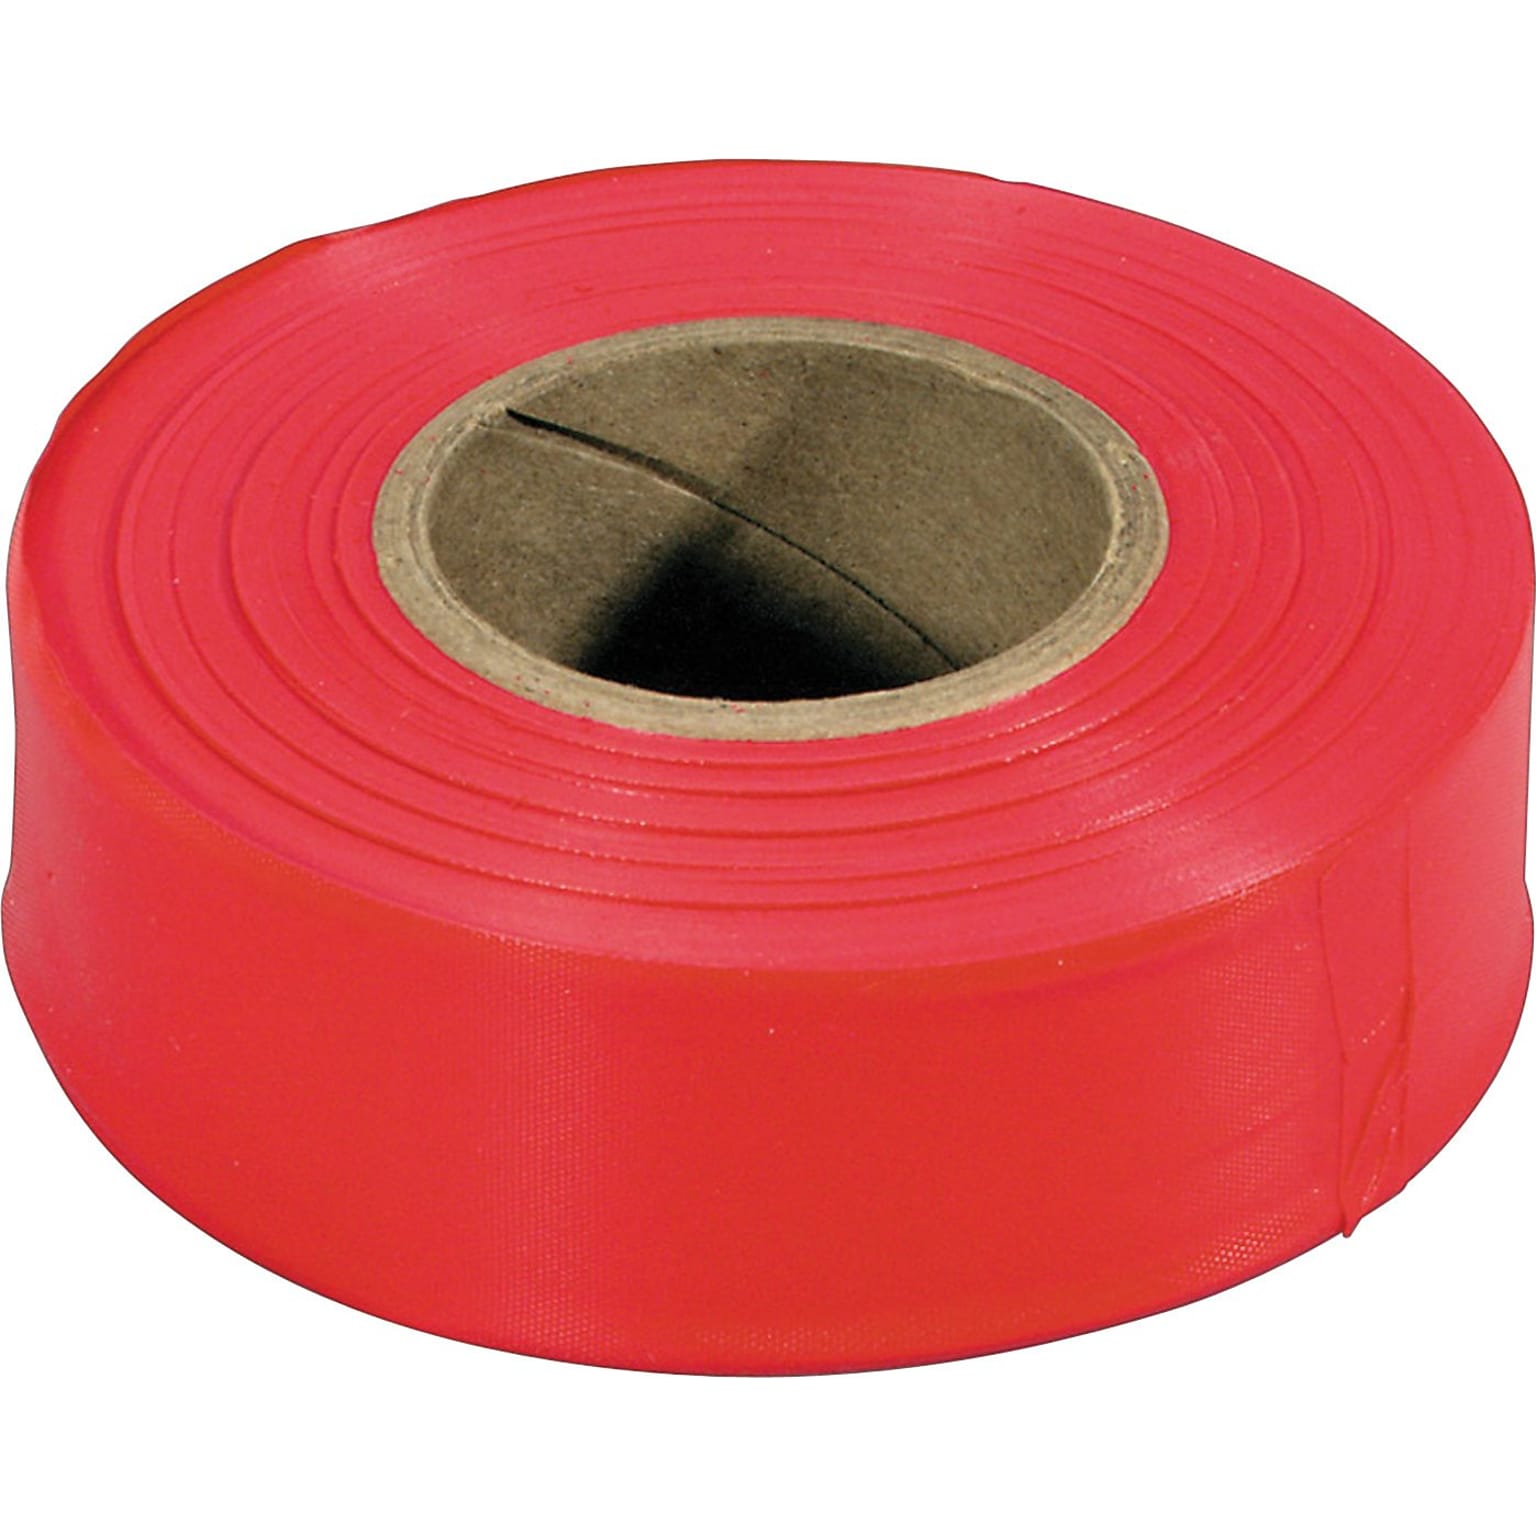 Irwin Strait-Line Flagging Tapes, Fluorescent Red, 150 Length (586-65601)